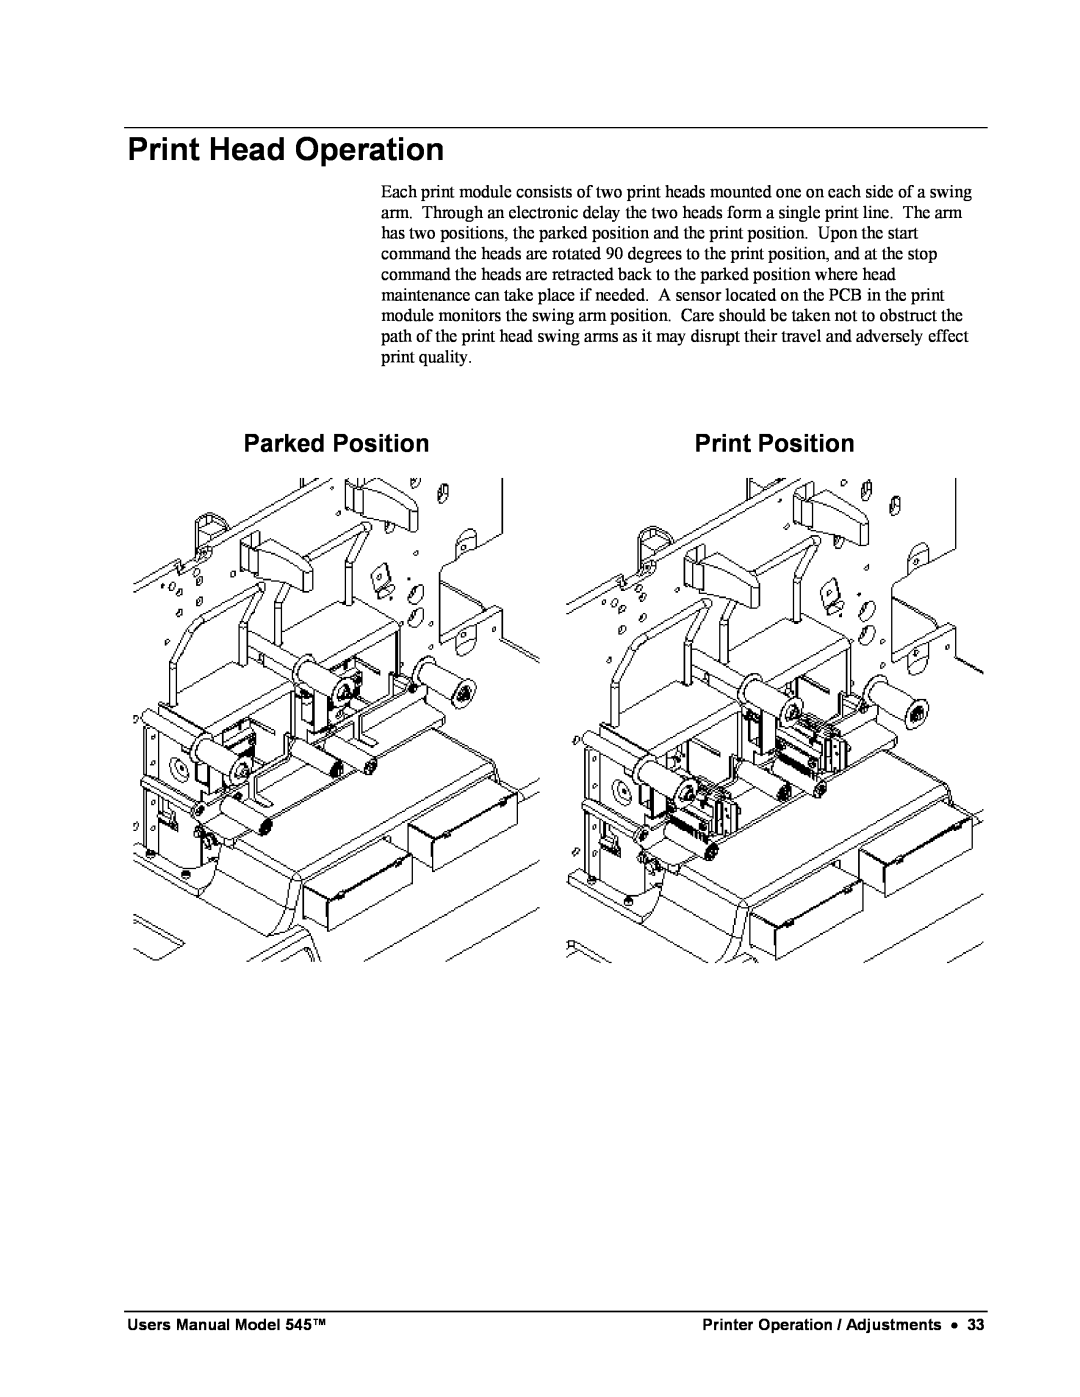 Paxar 545 user manual Print Head Operation, Parked Position, Print Position 